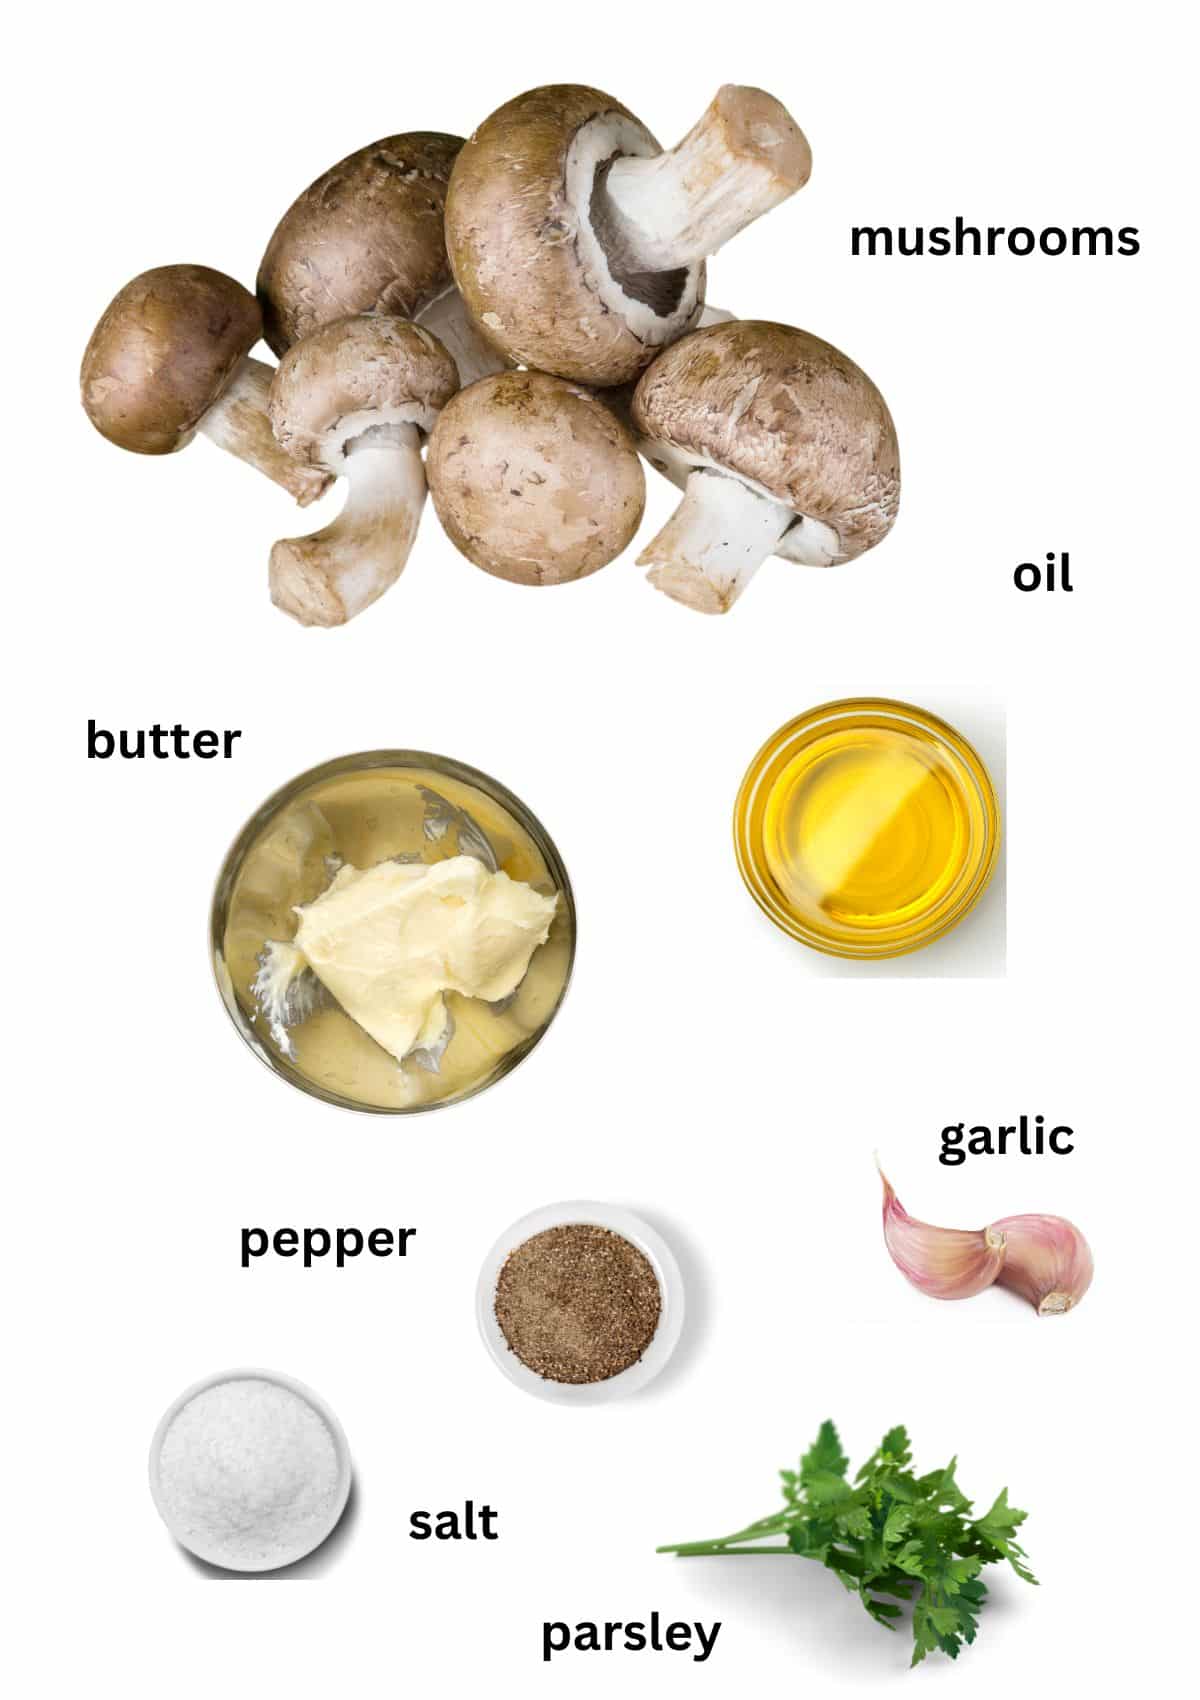 labeled ingredients for making sauteed mushrooms.